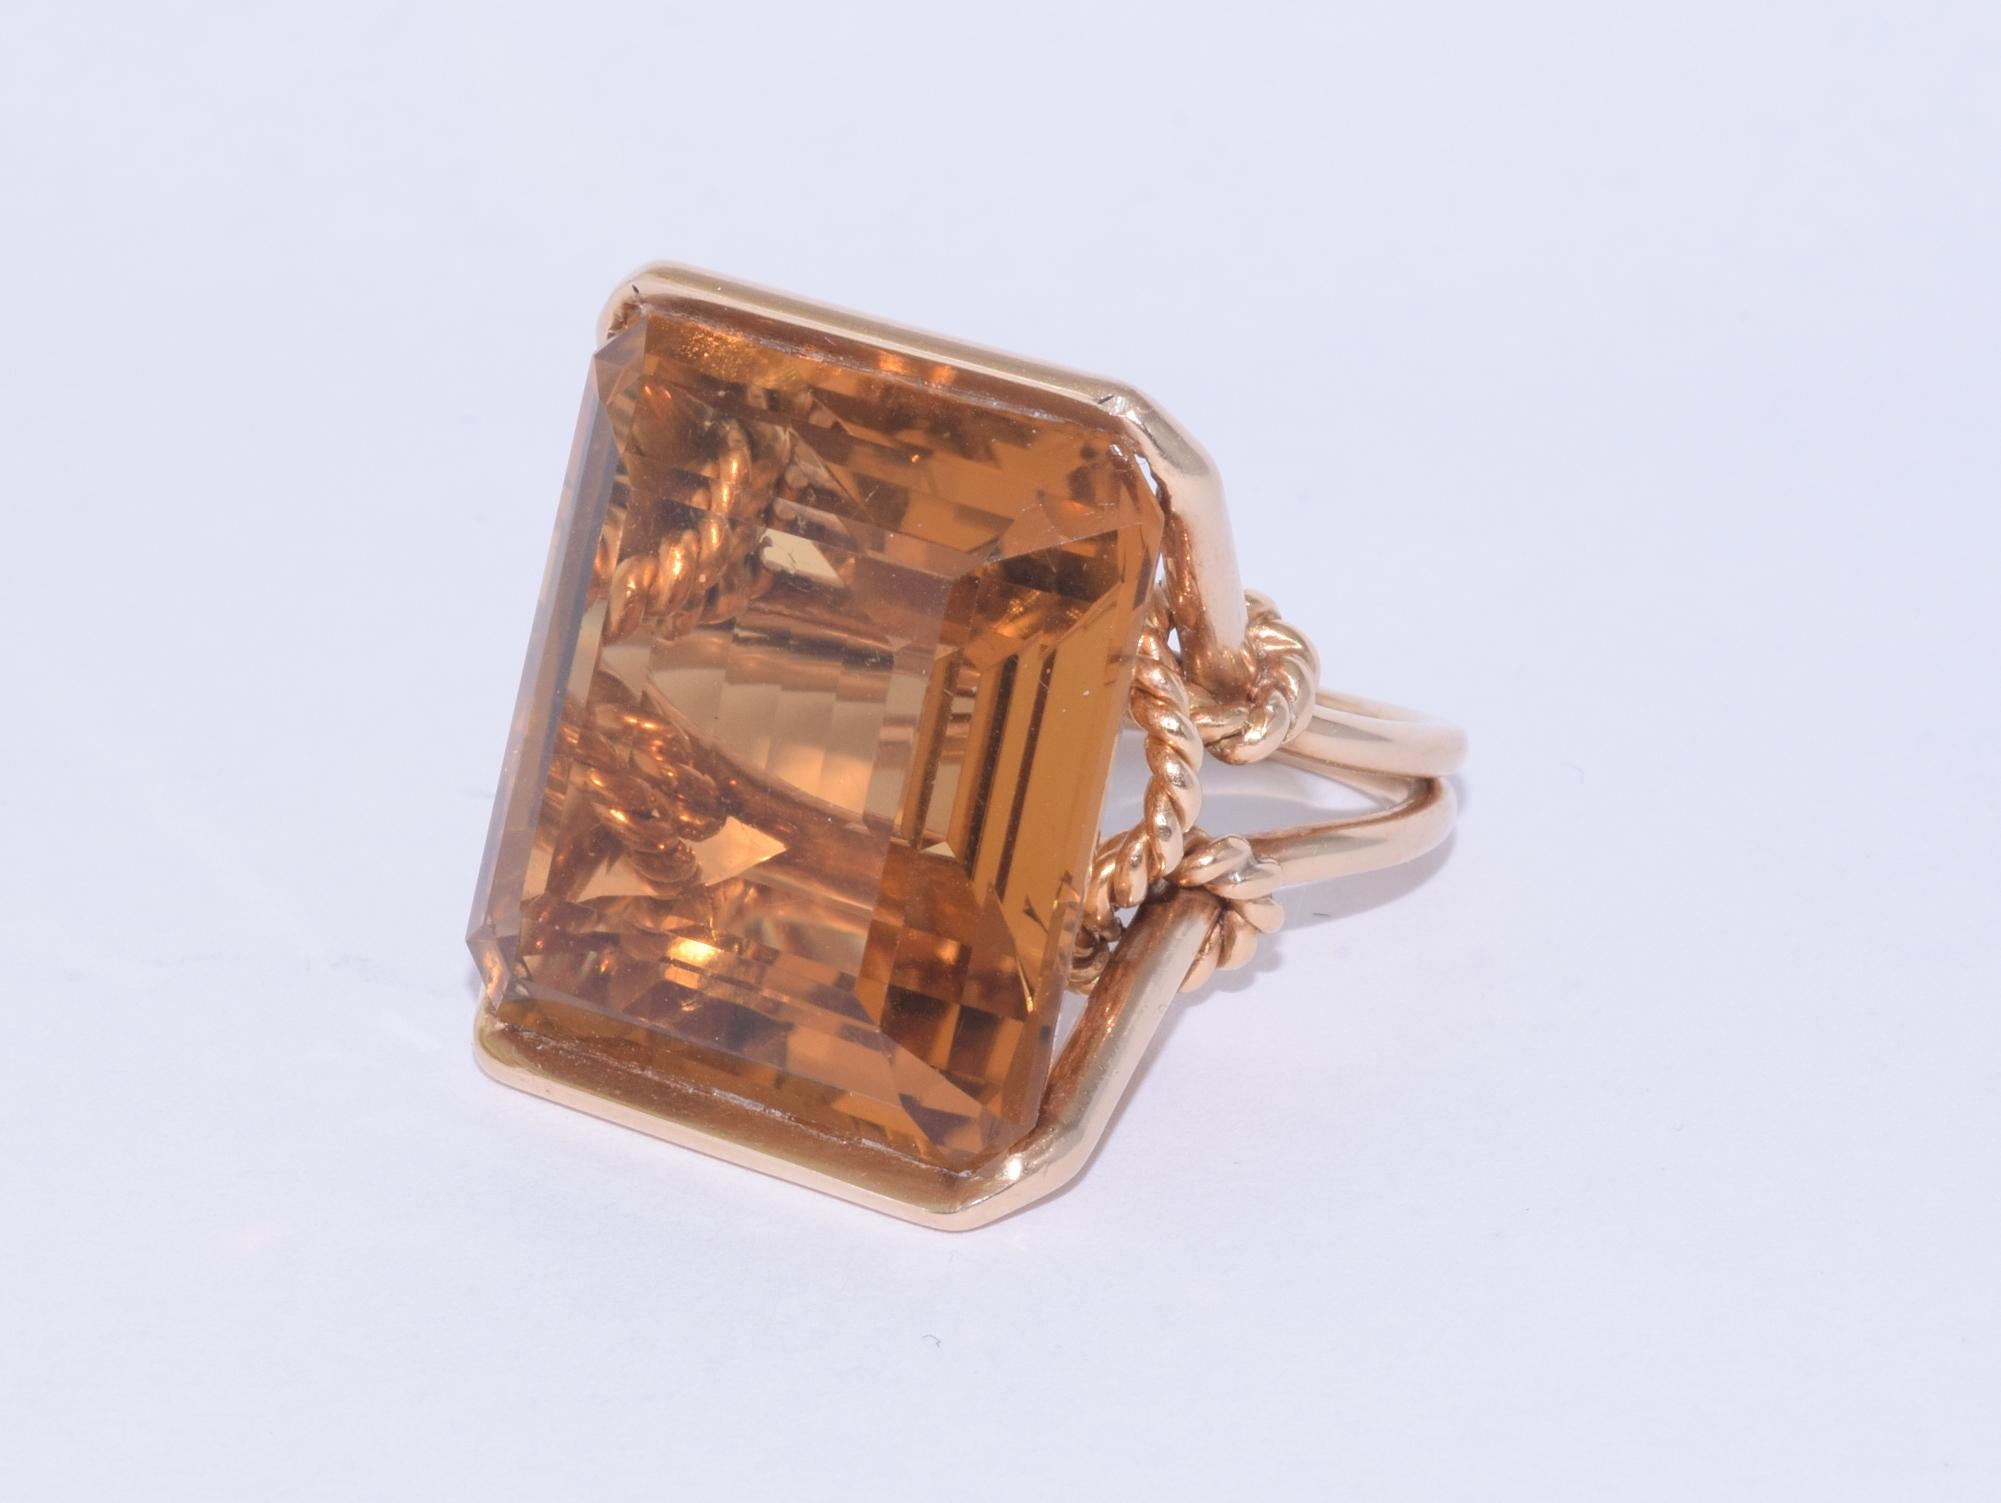 An impressive emerald cut citrine weighing 42.84 carats is mounted in 18 karat yellow gold with decorative knotted rope motifs. Finger size 6.5, 
14.47mm height off finger. The top of the ring measures approximately 25.3 x 20.9mm.